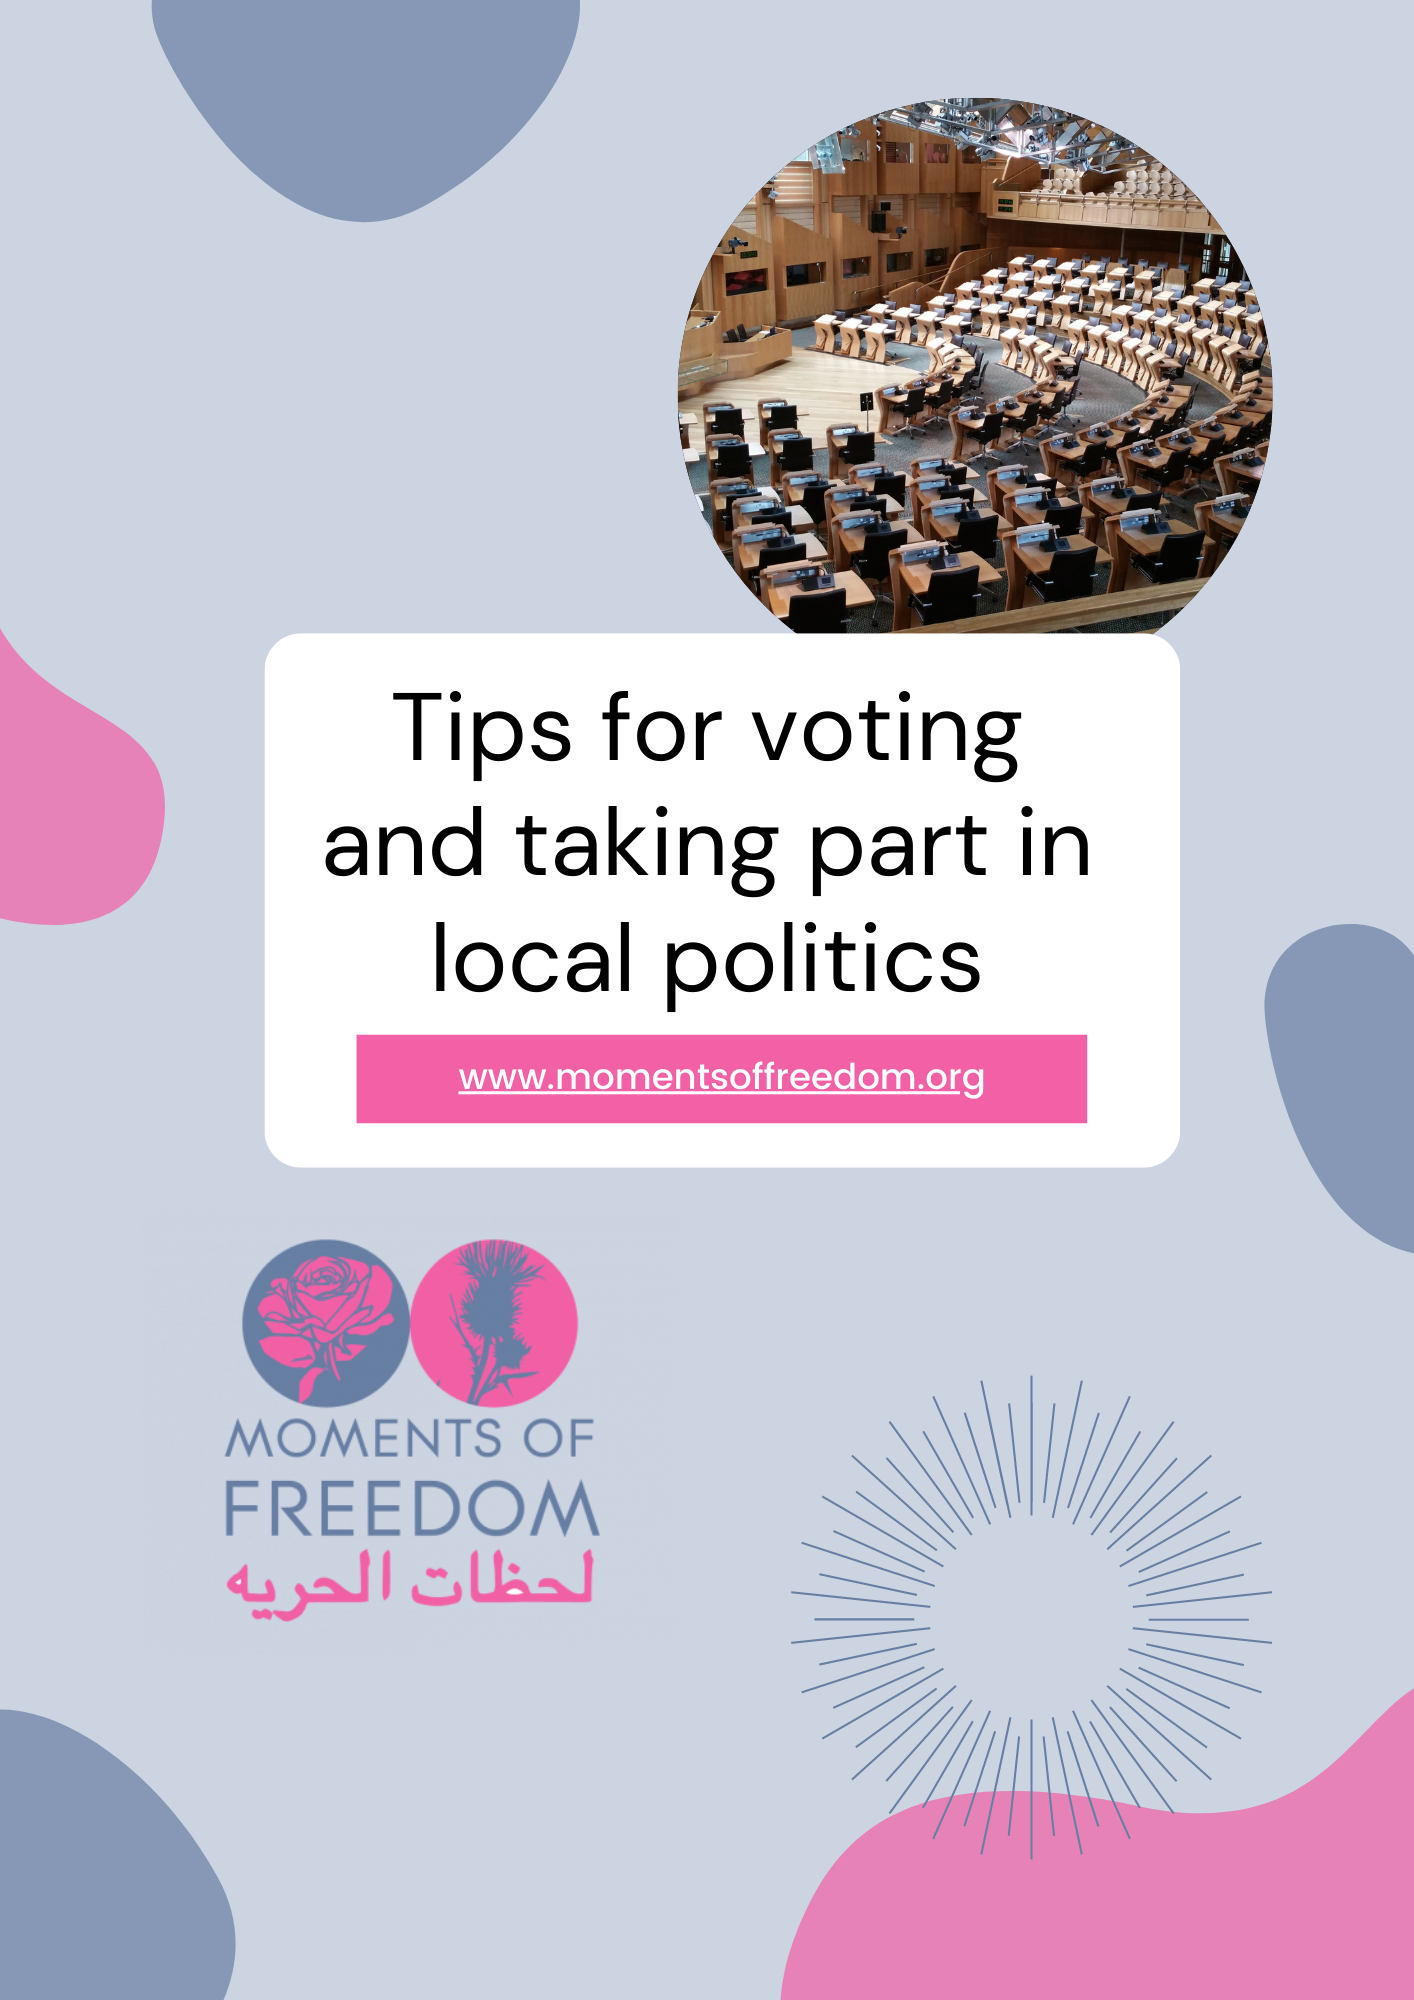 Tips for voting and taking part in local politics